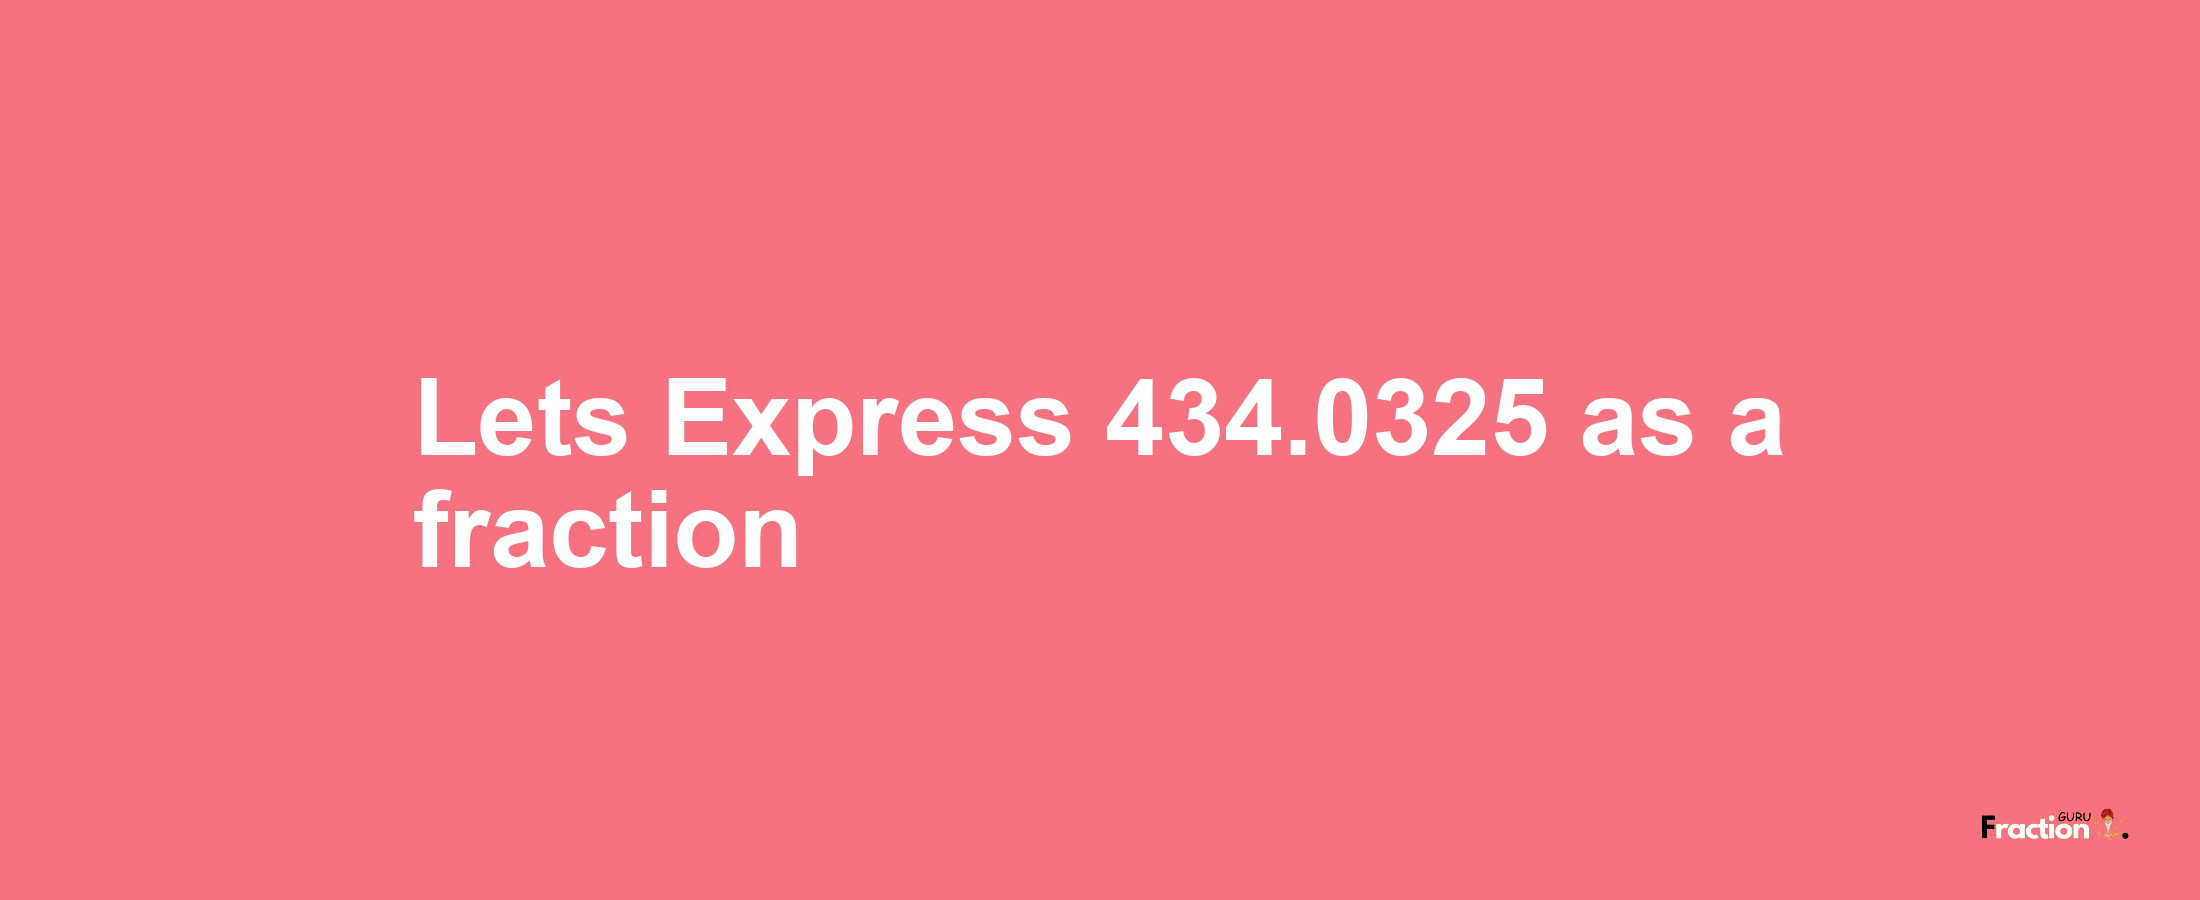 Lets Express 434.0325 as afraction